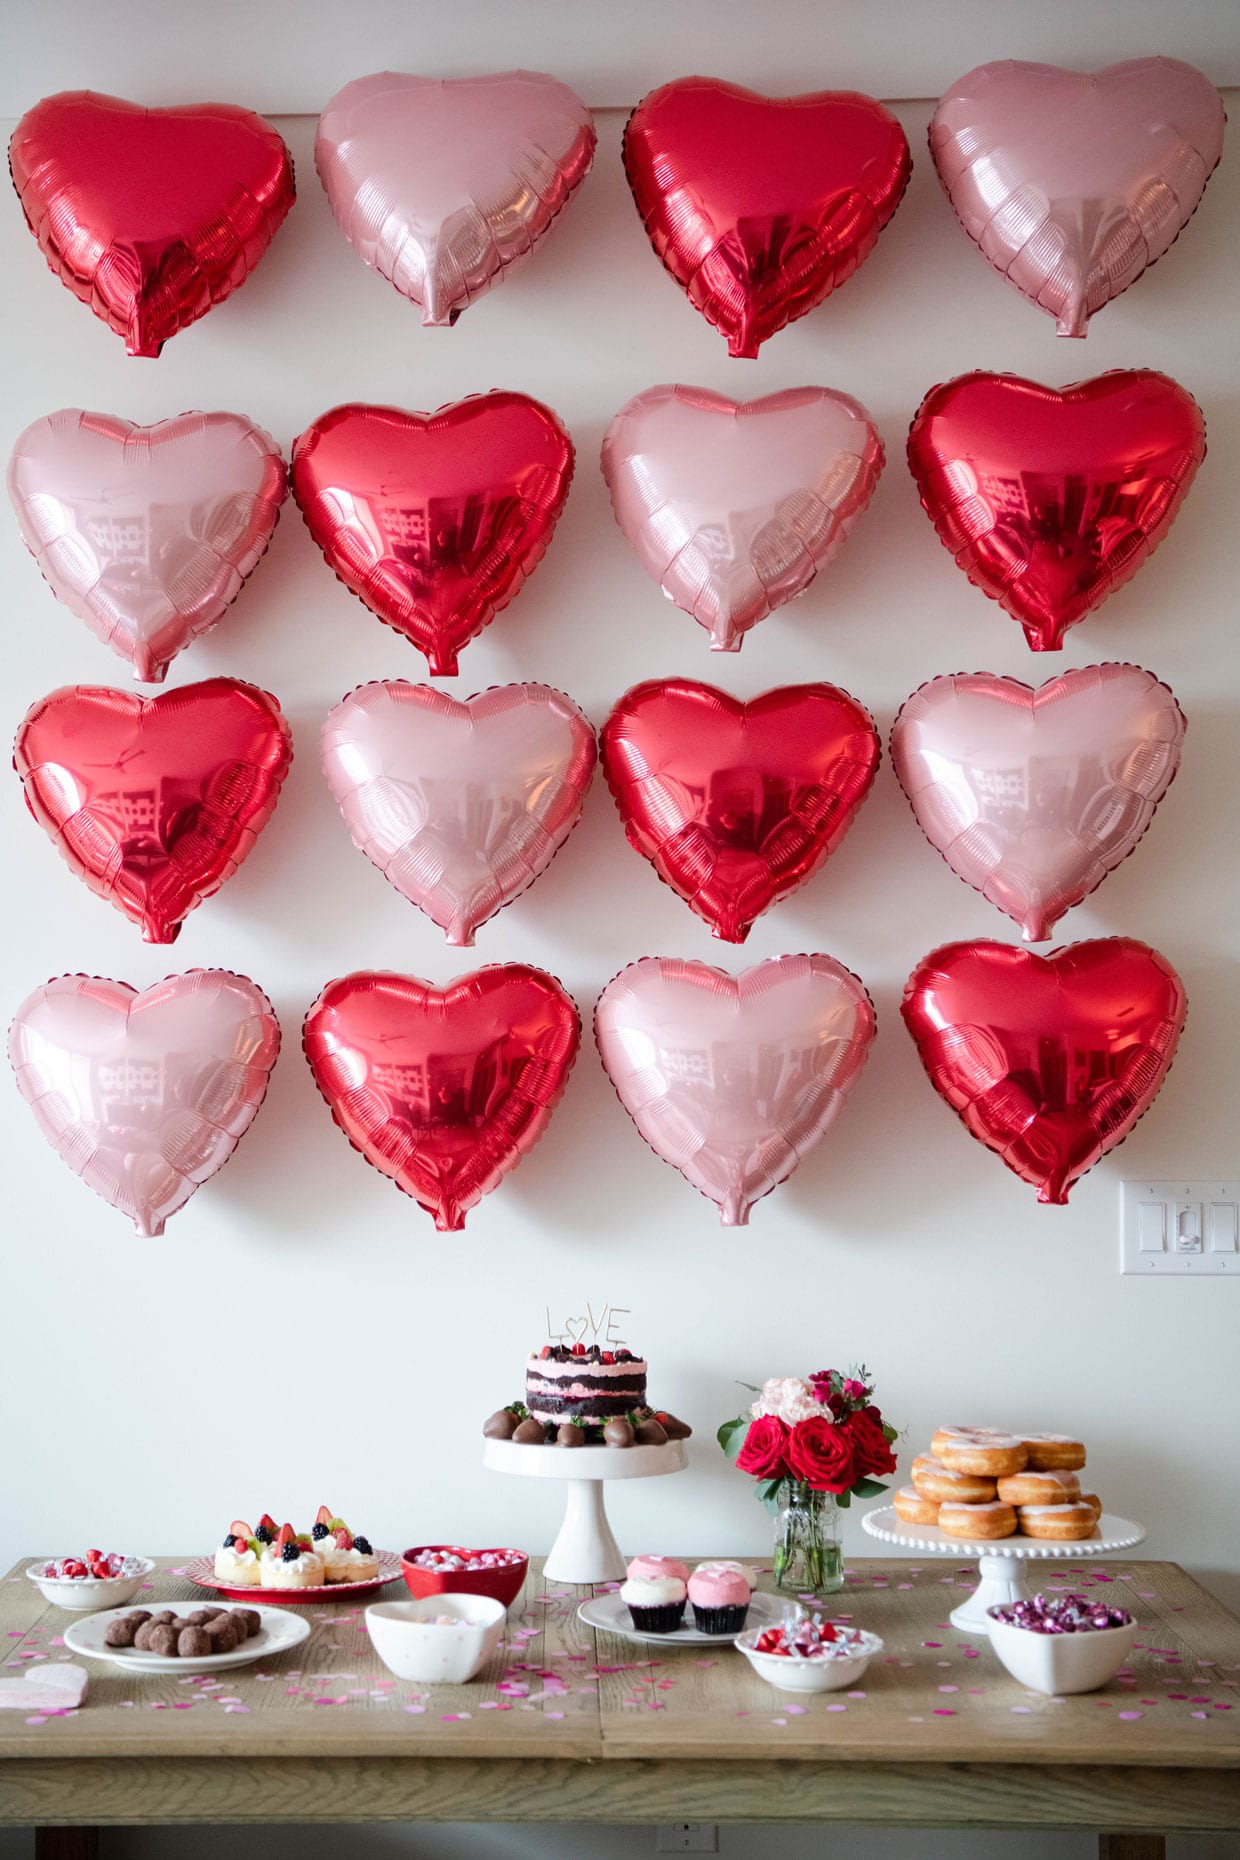 A table set with desserts in front of a pink and red heart wall.